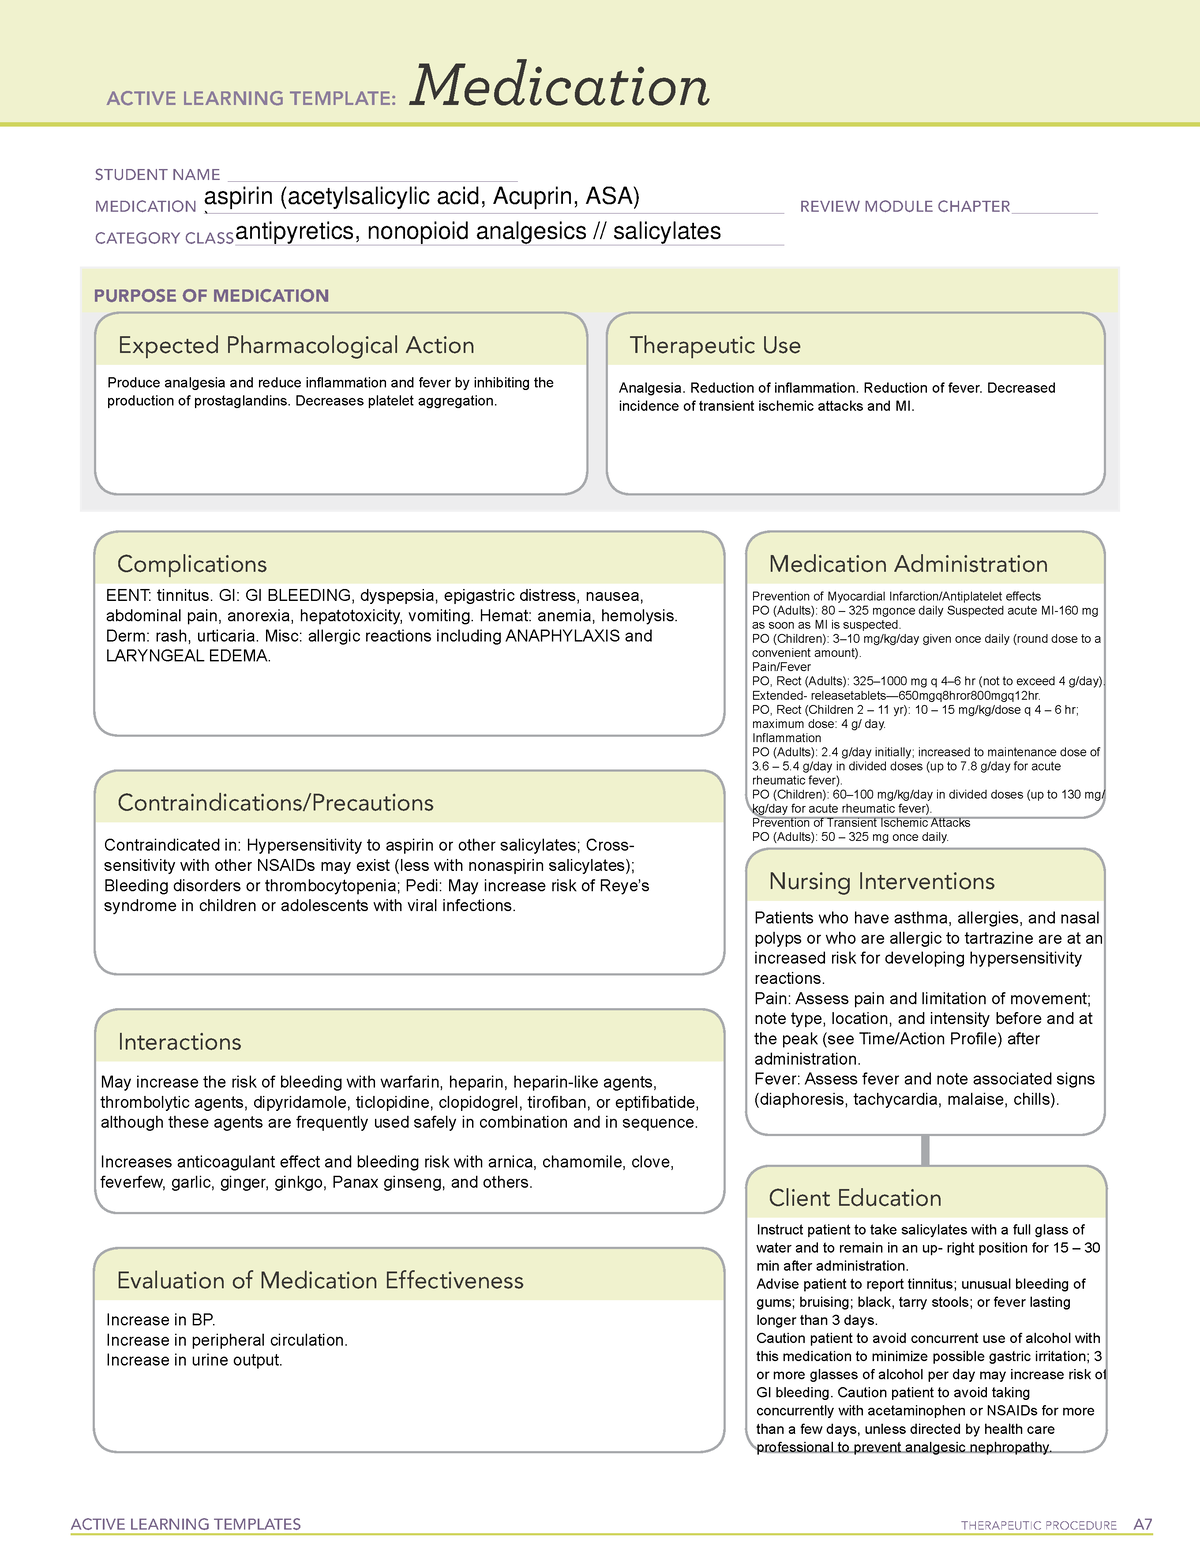 Active Learning Template medication-25 - Nursing Pharmacology - StuDocu With Regard To Pharmacology Drug Card Template